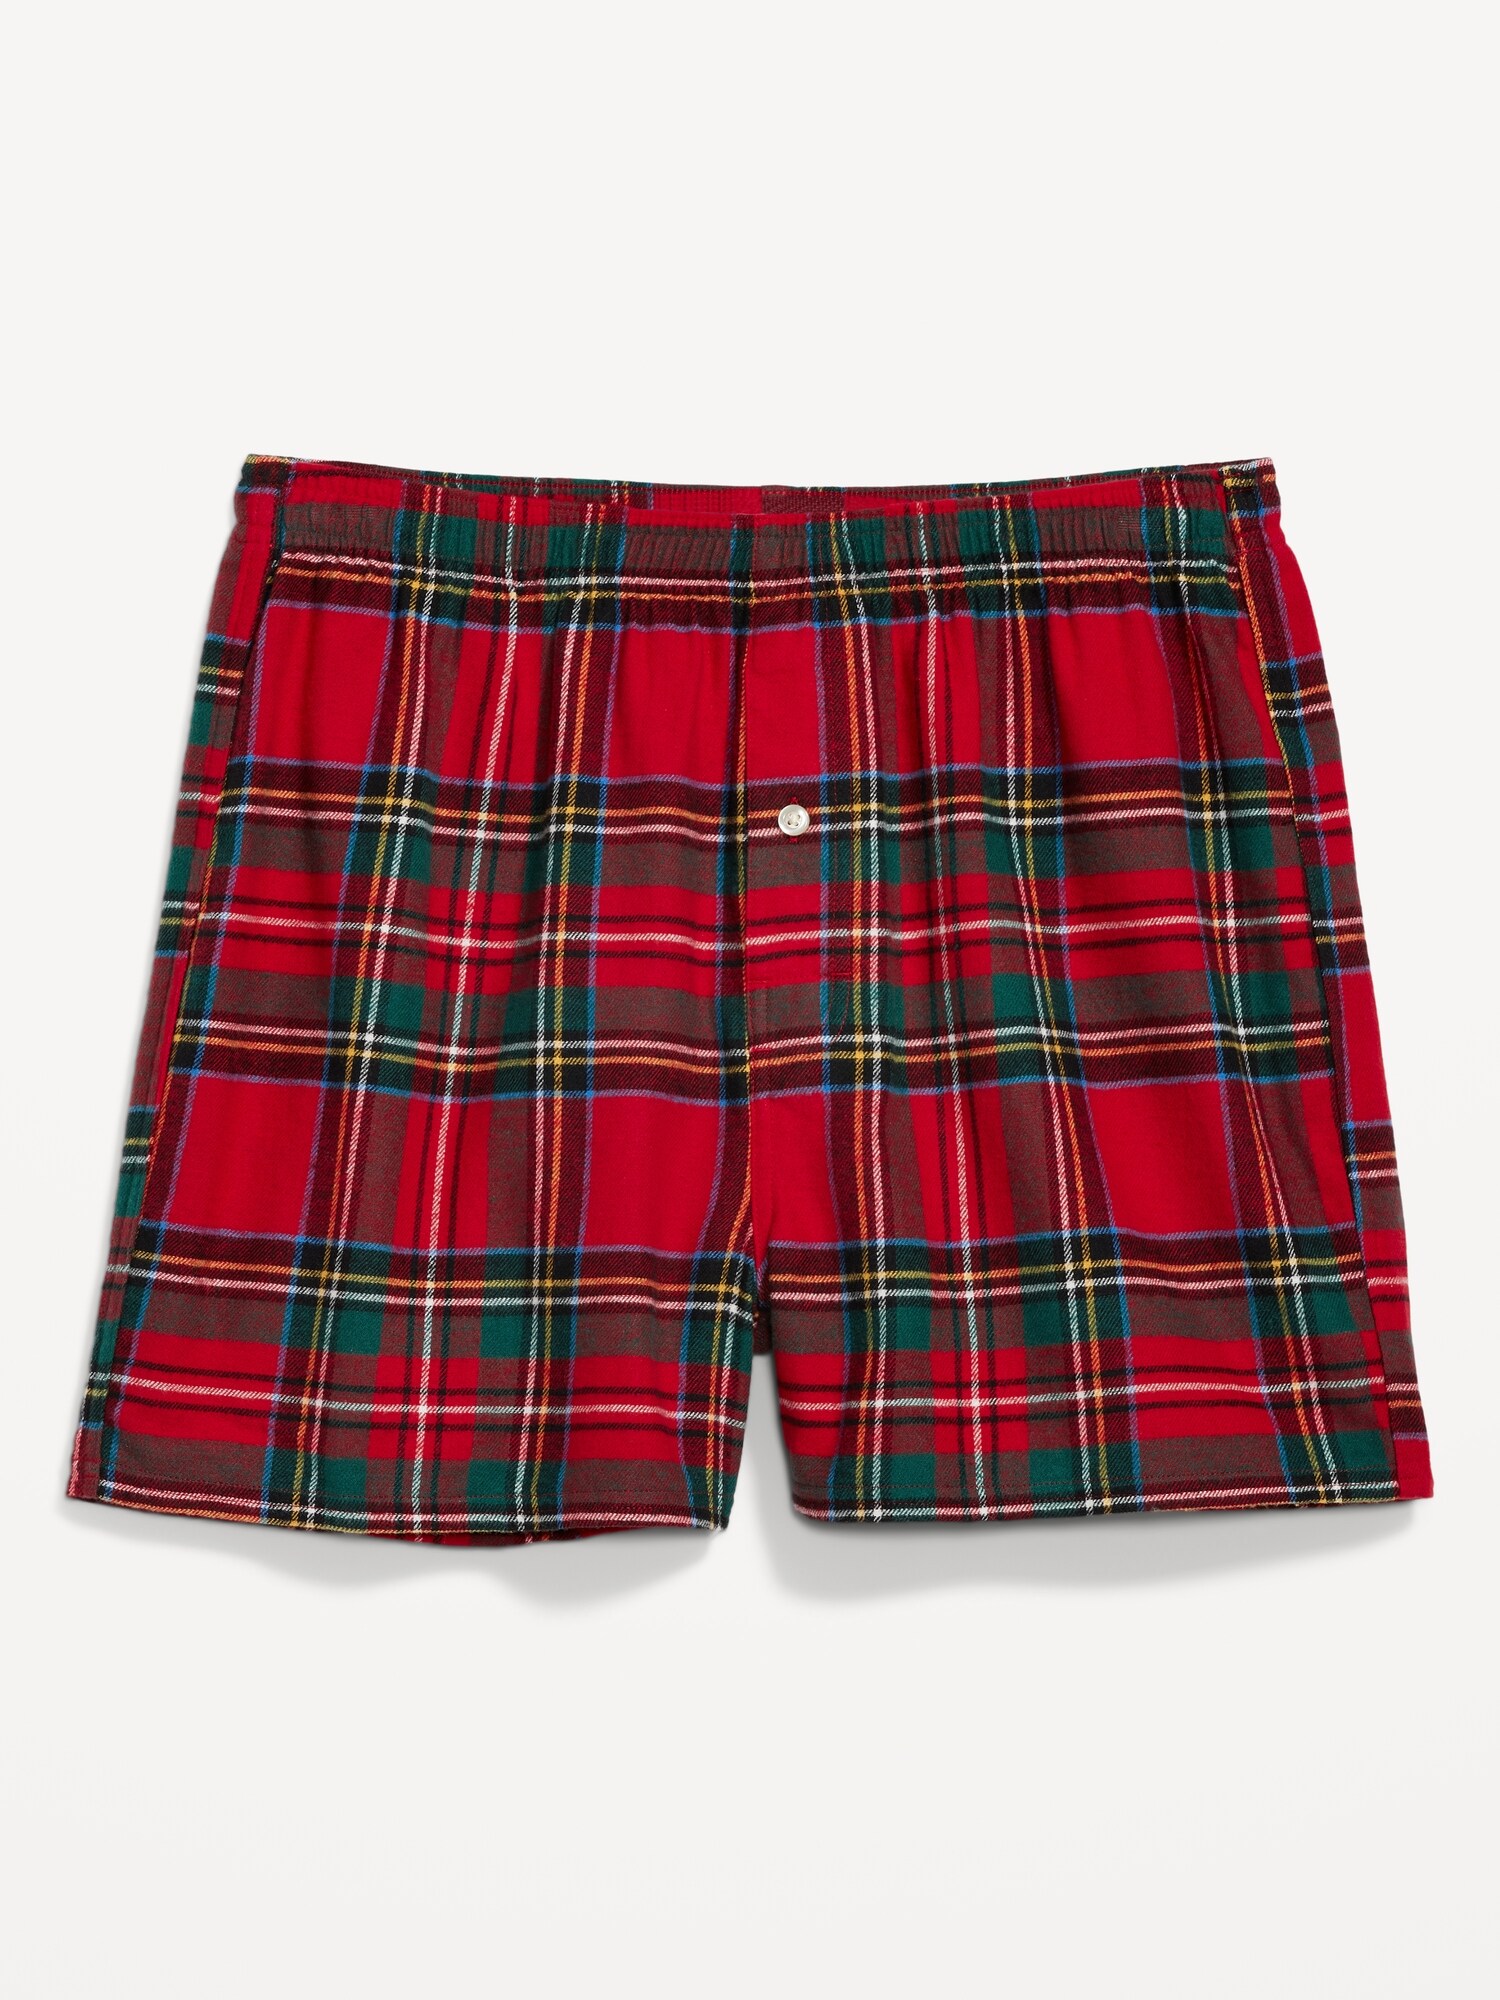 Old Navy Matching Printed Flannel Pajama Boxer Shorts for Men -- 3.75-inch inseam red. 1